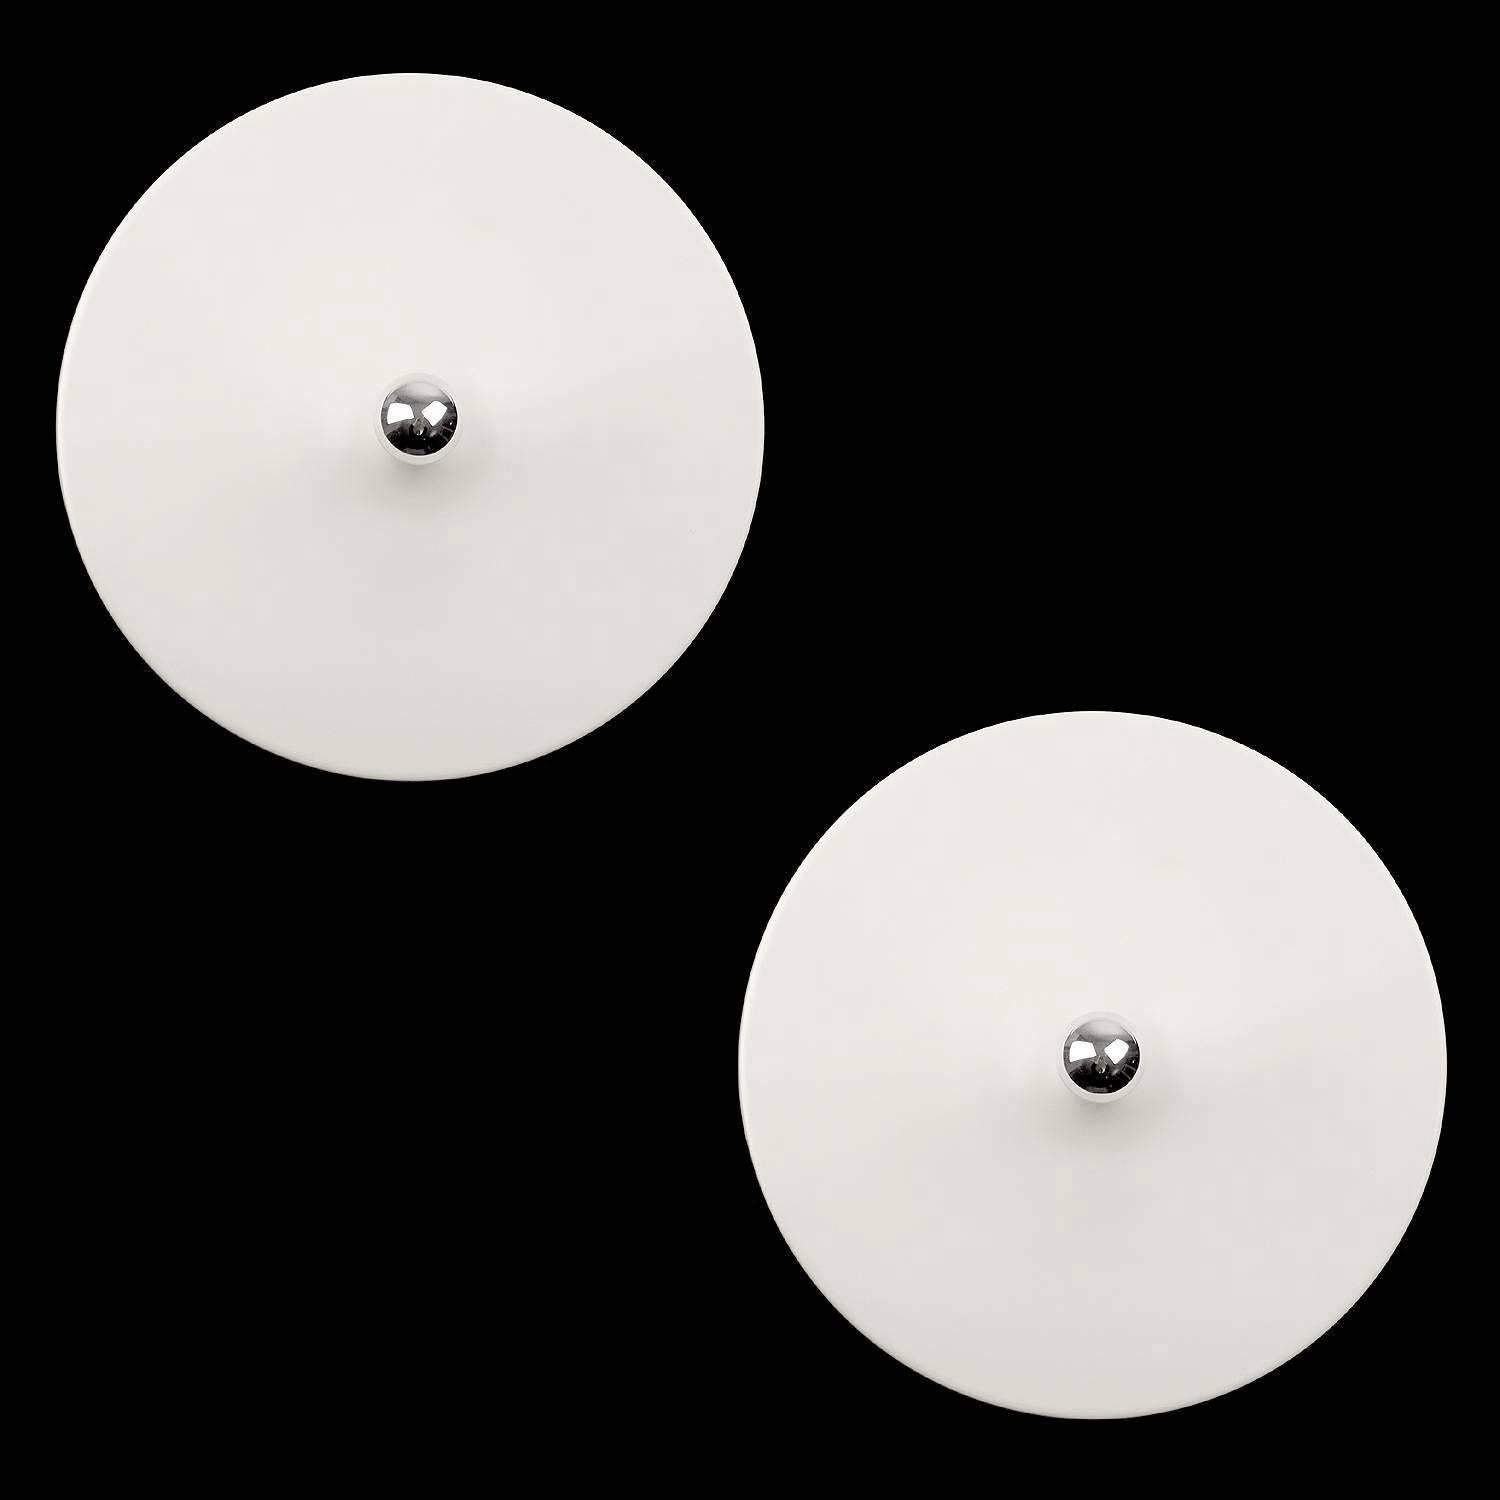 Pair of very large white enameled disc shaped sconces based on a design by Charlotte Perriand. Due to their unusual large size, these sconces will perfect complement grand entrance, bars, hotel lobby restaurant,etc. Rather than excelling in elegance